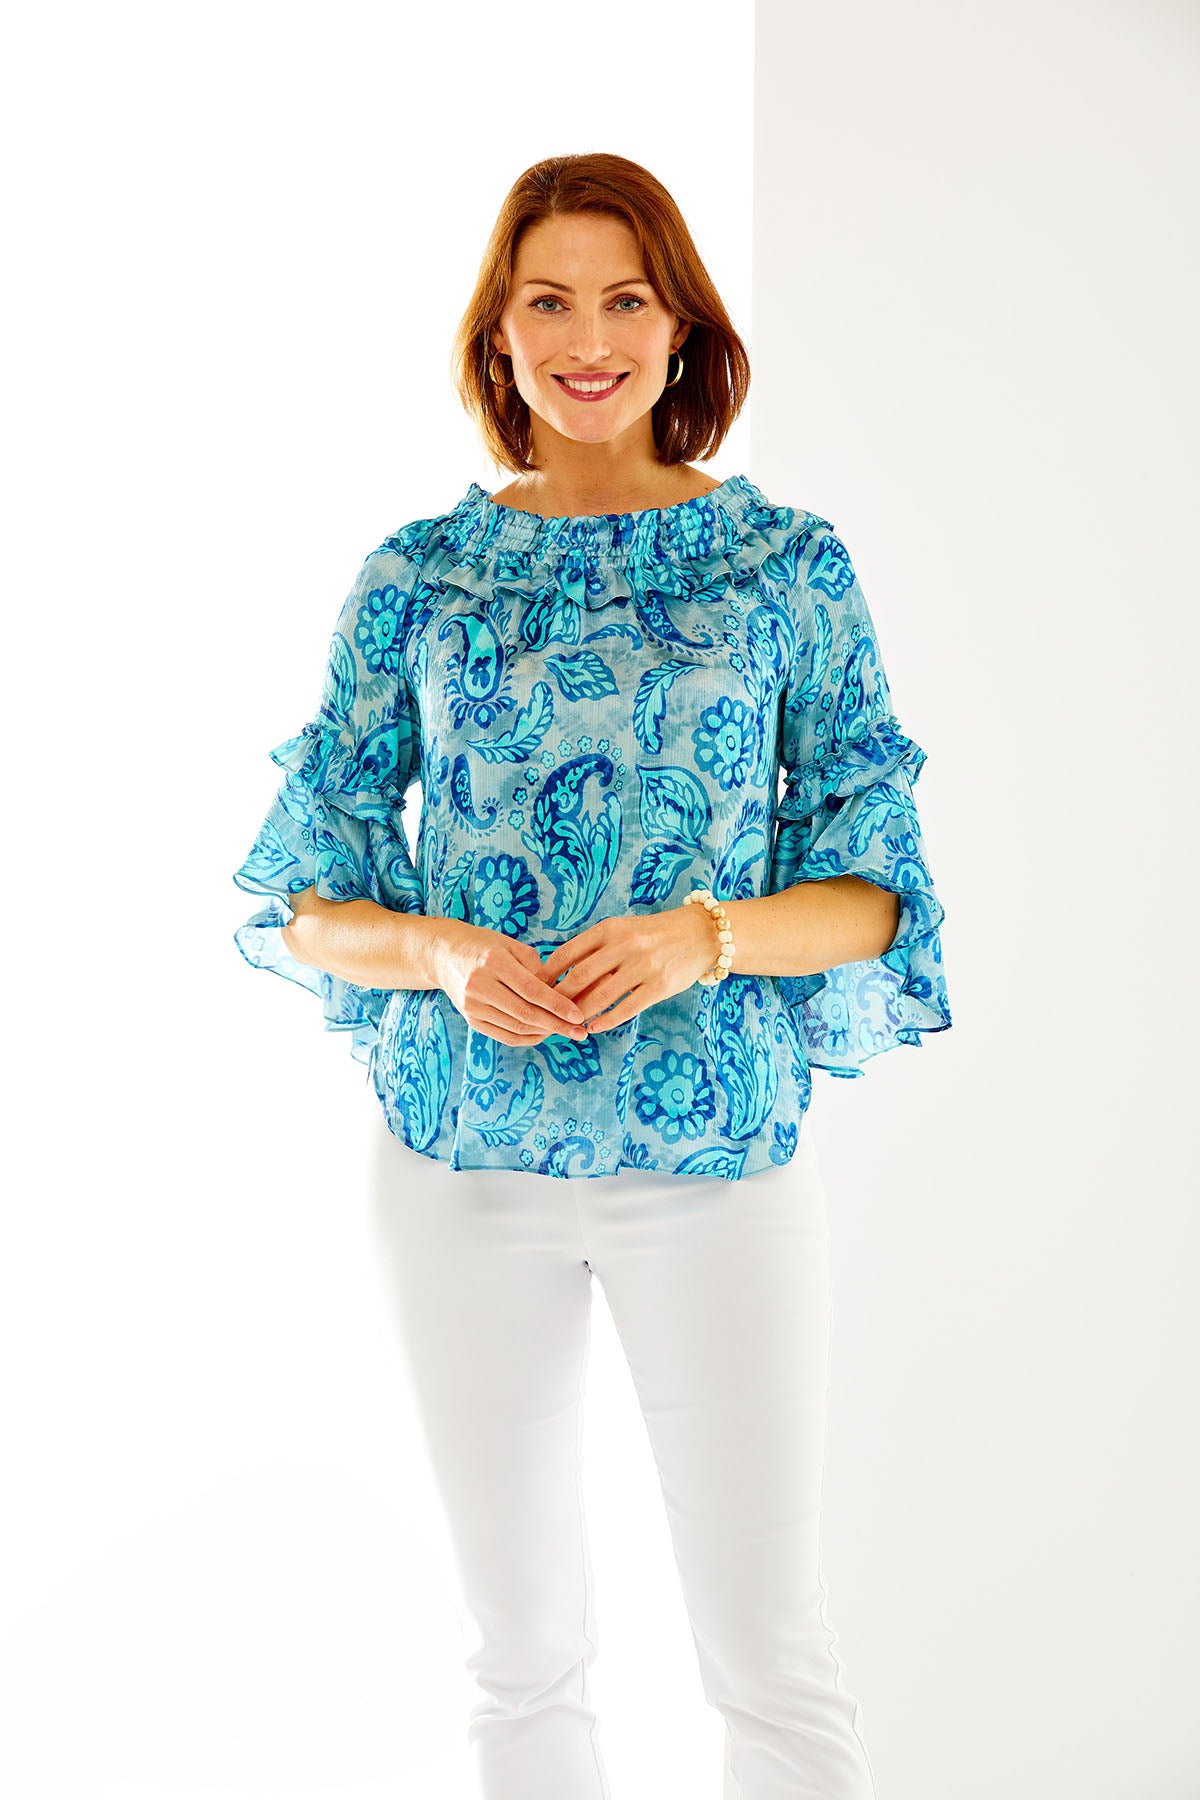 Woman in blue paisley blouse